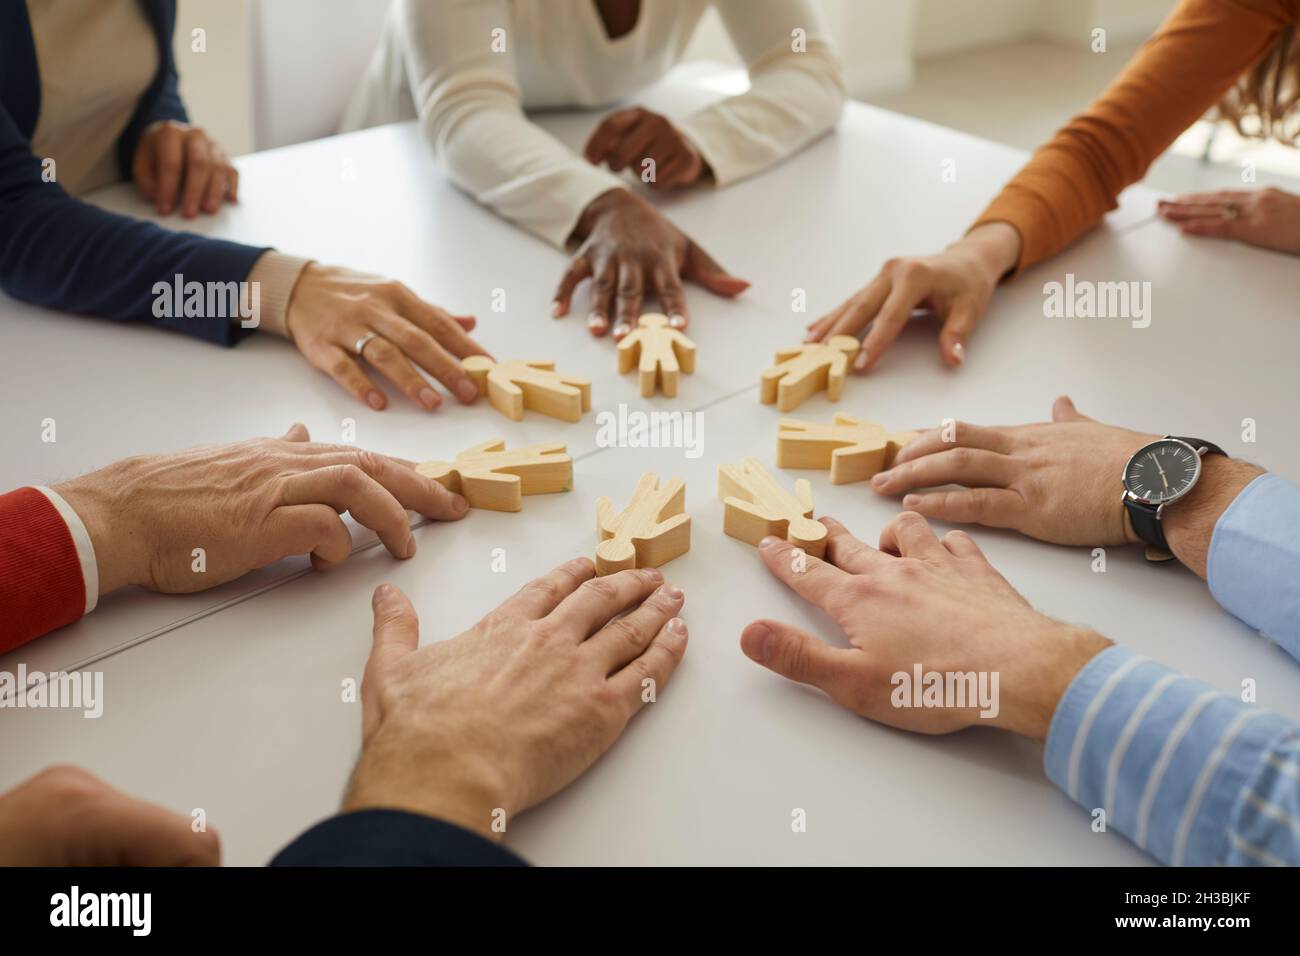 Group of business people join little human figures as symbol of community and teamwork Stock Photo